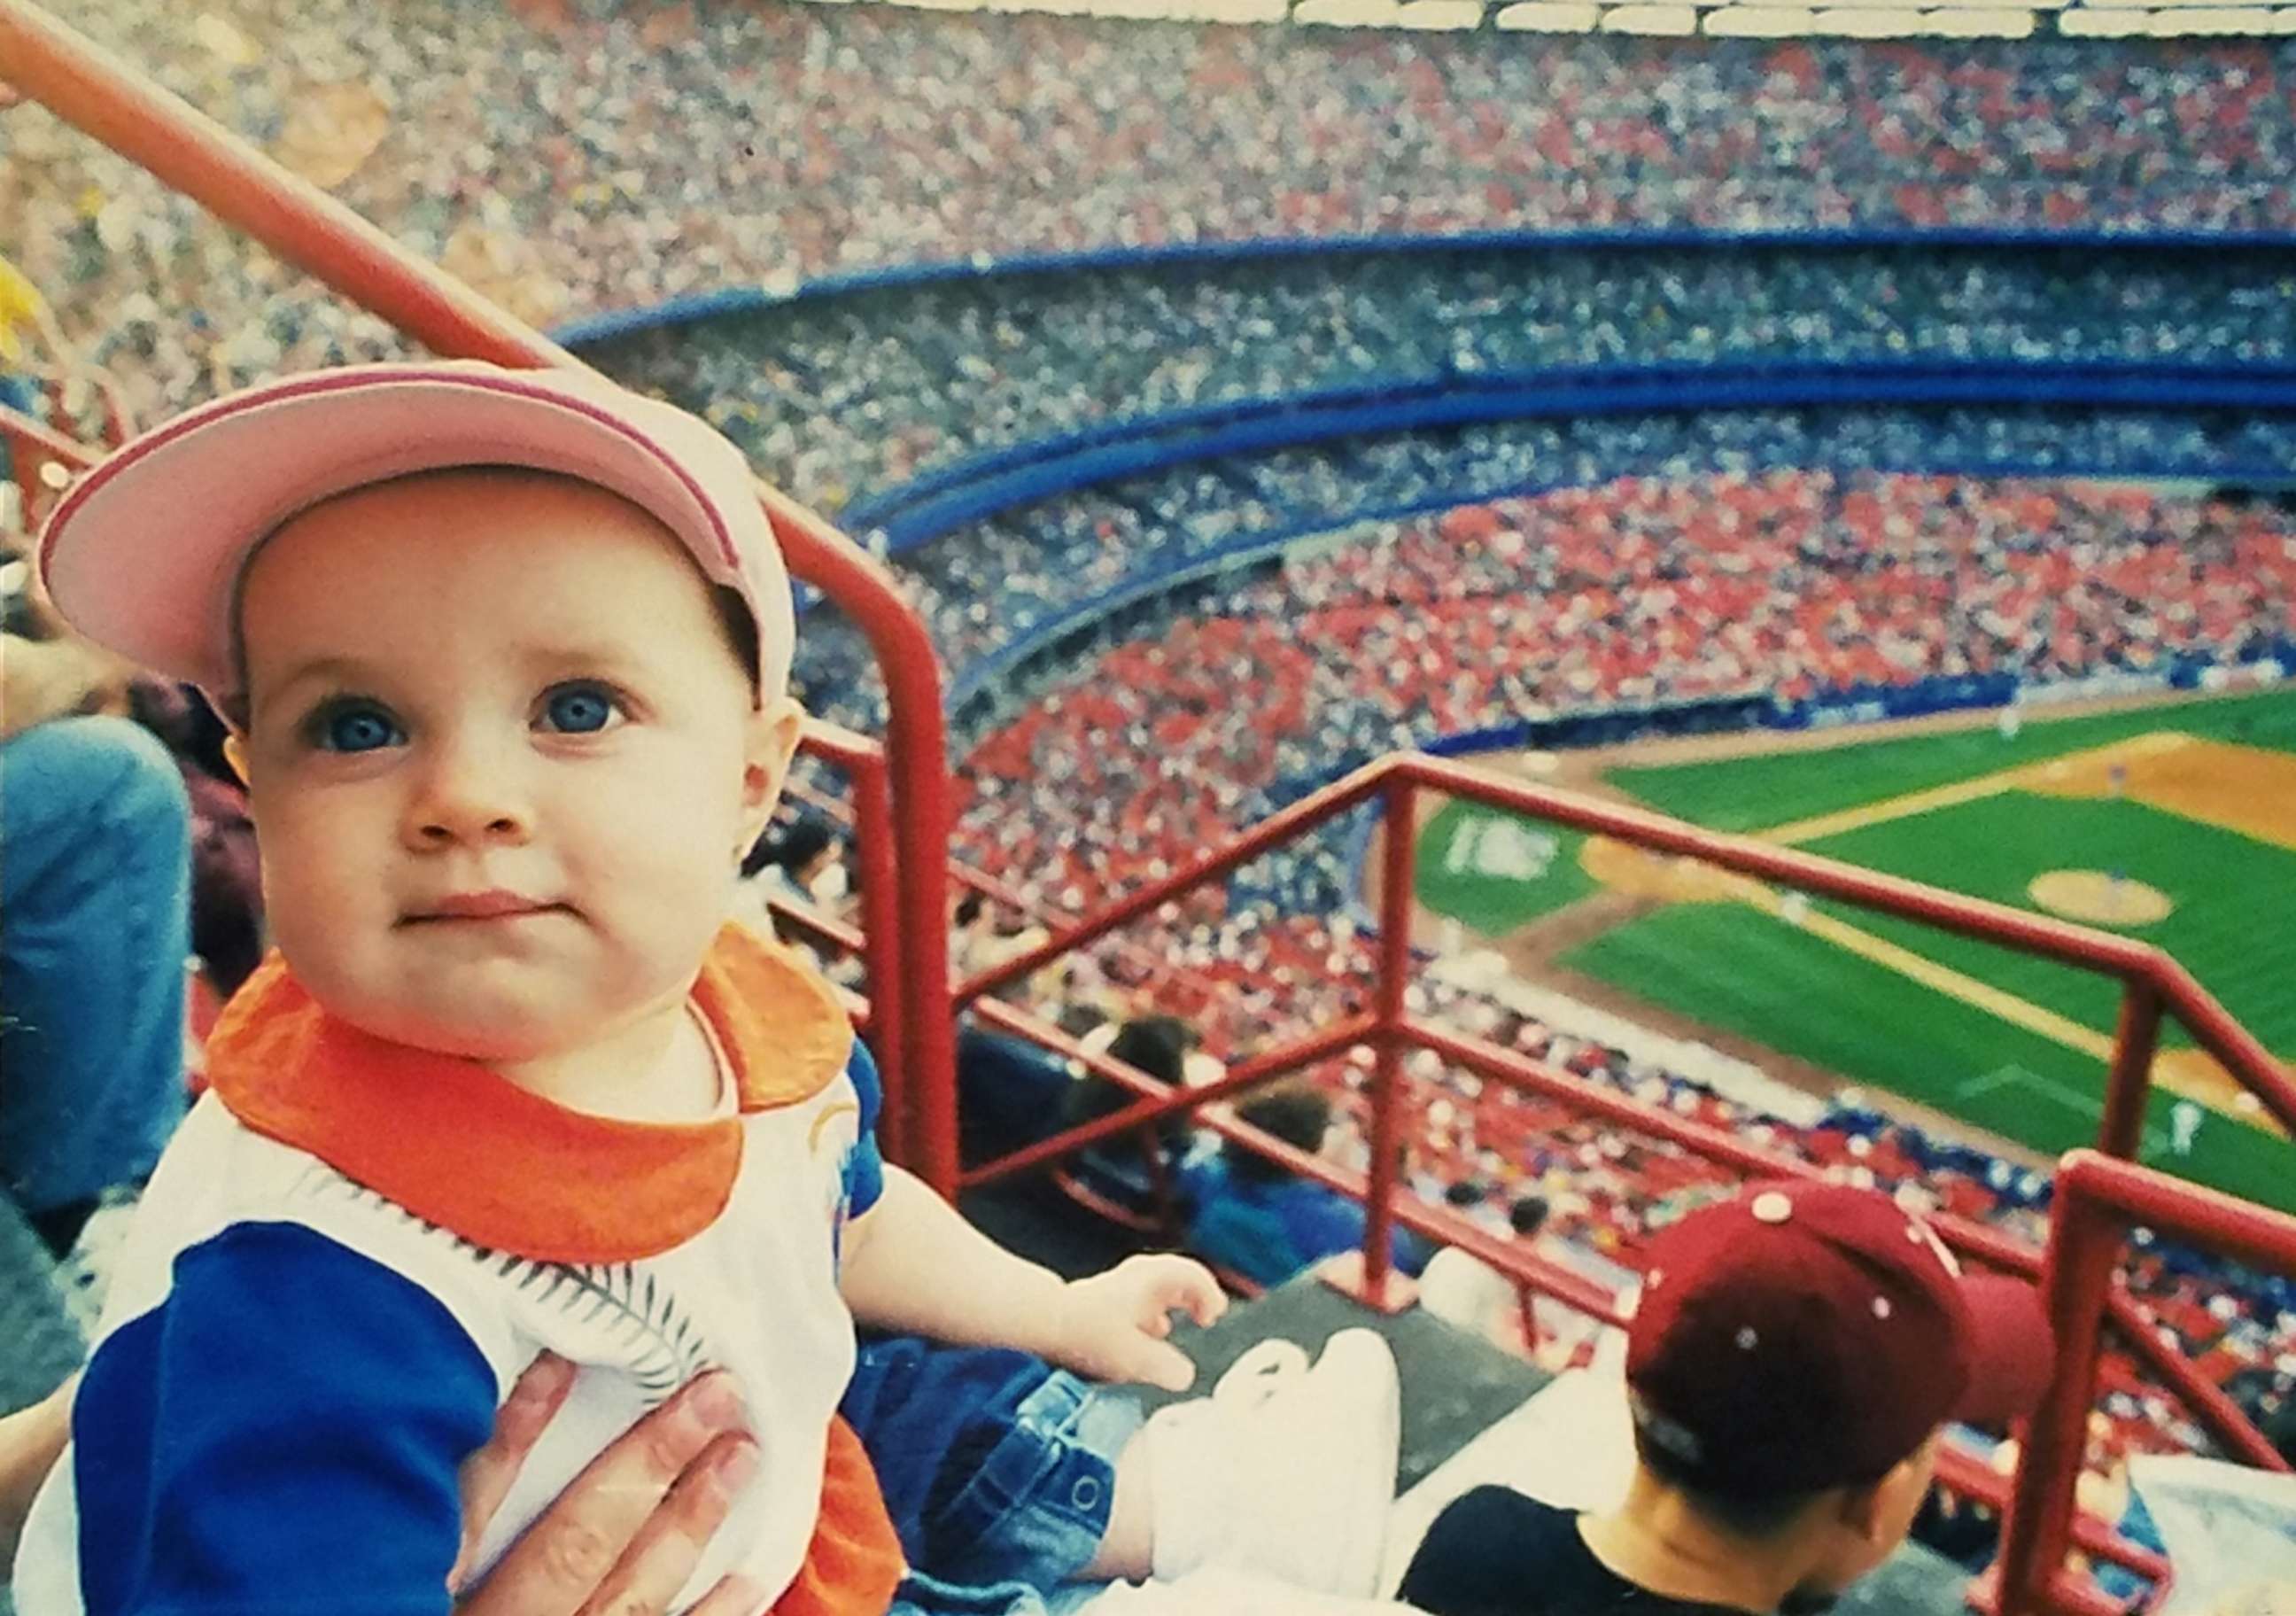 PHOTO: Callie Quinn as a baby, decked out in the Mets team colors at one of the team's games in an undated photo.